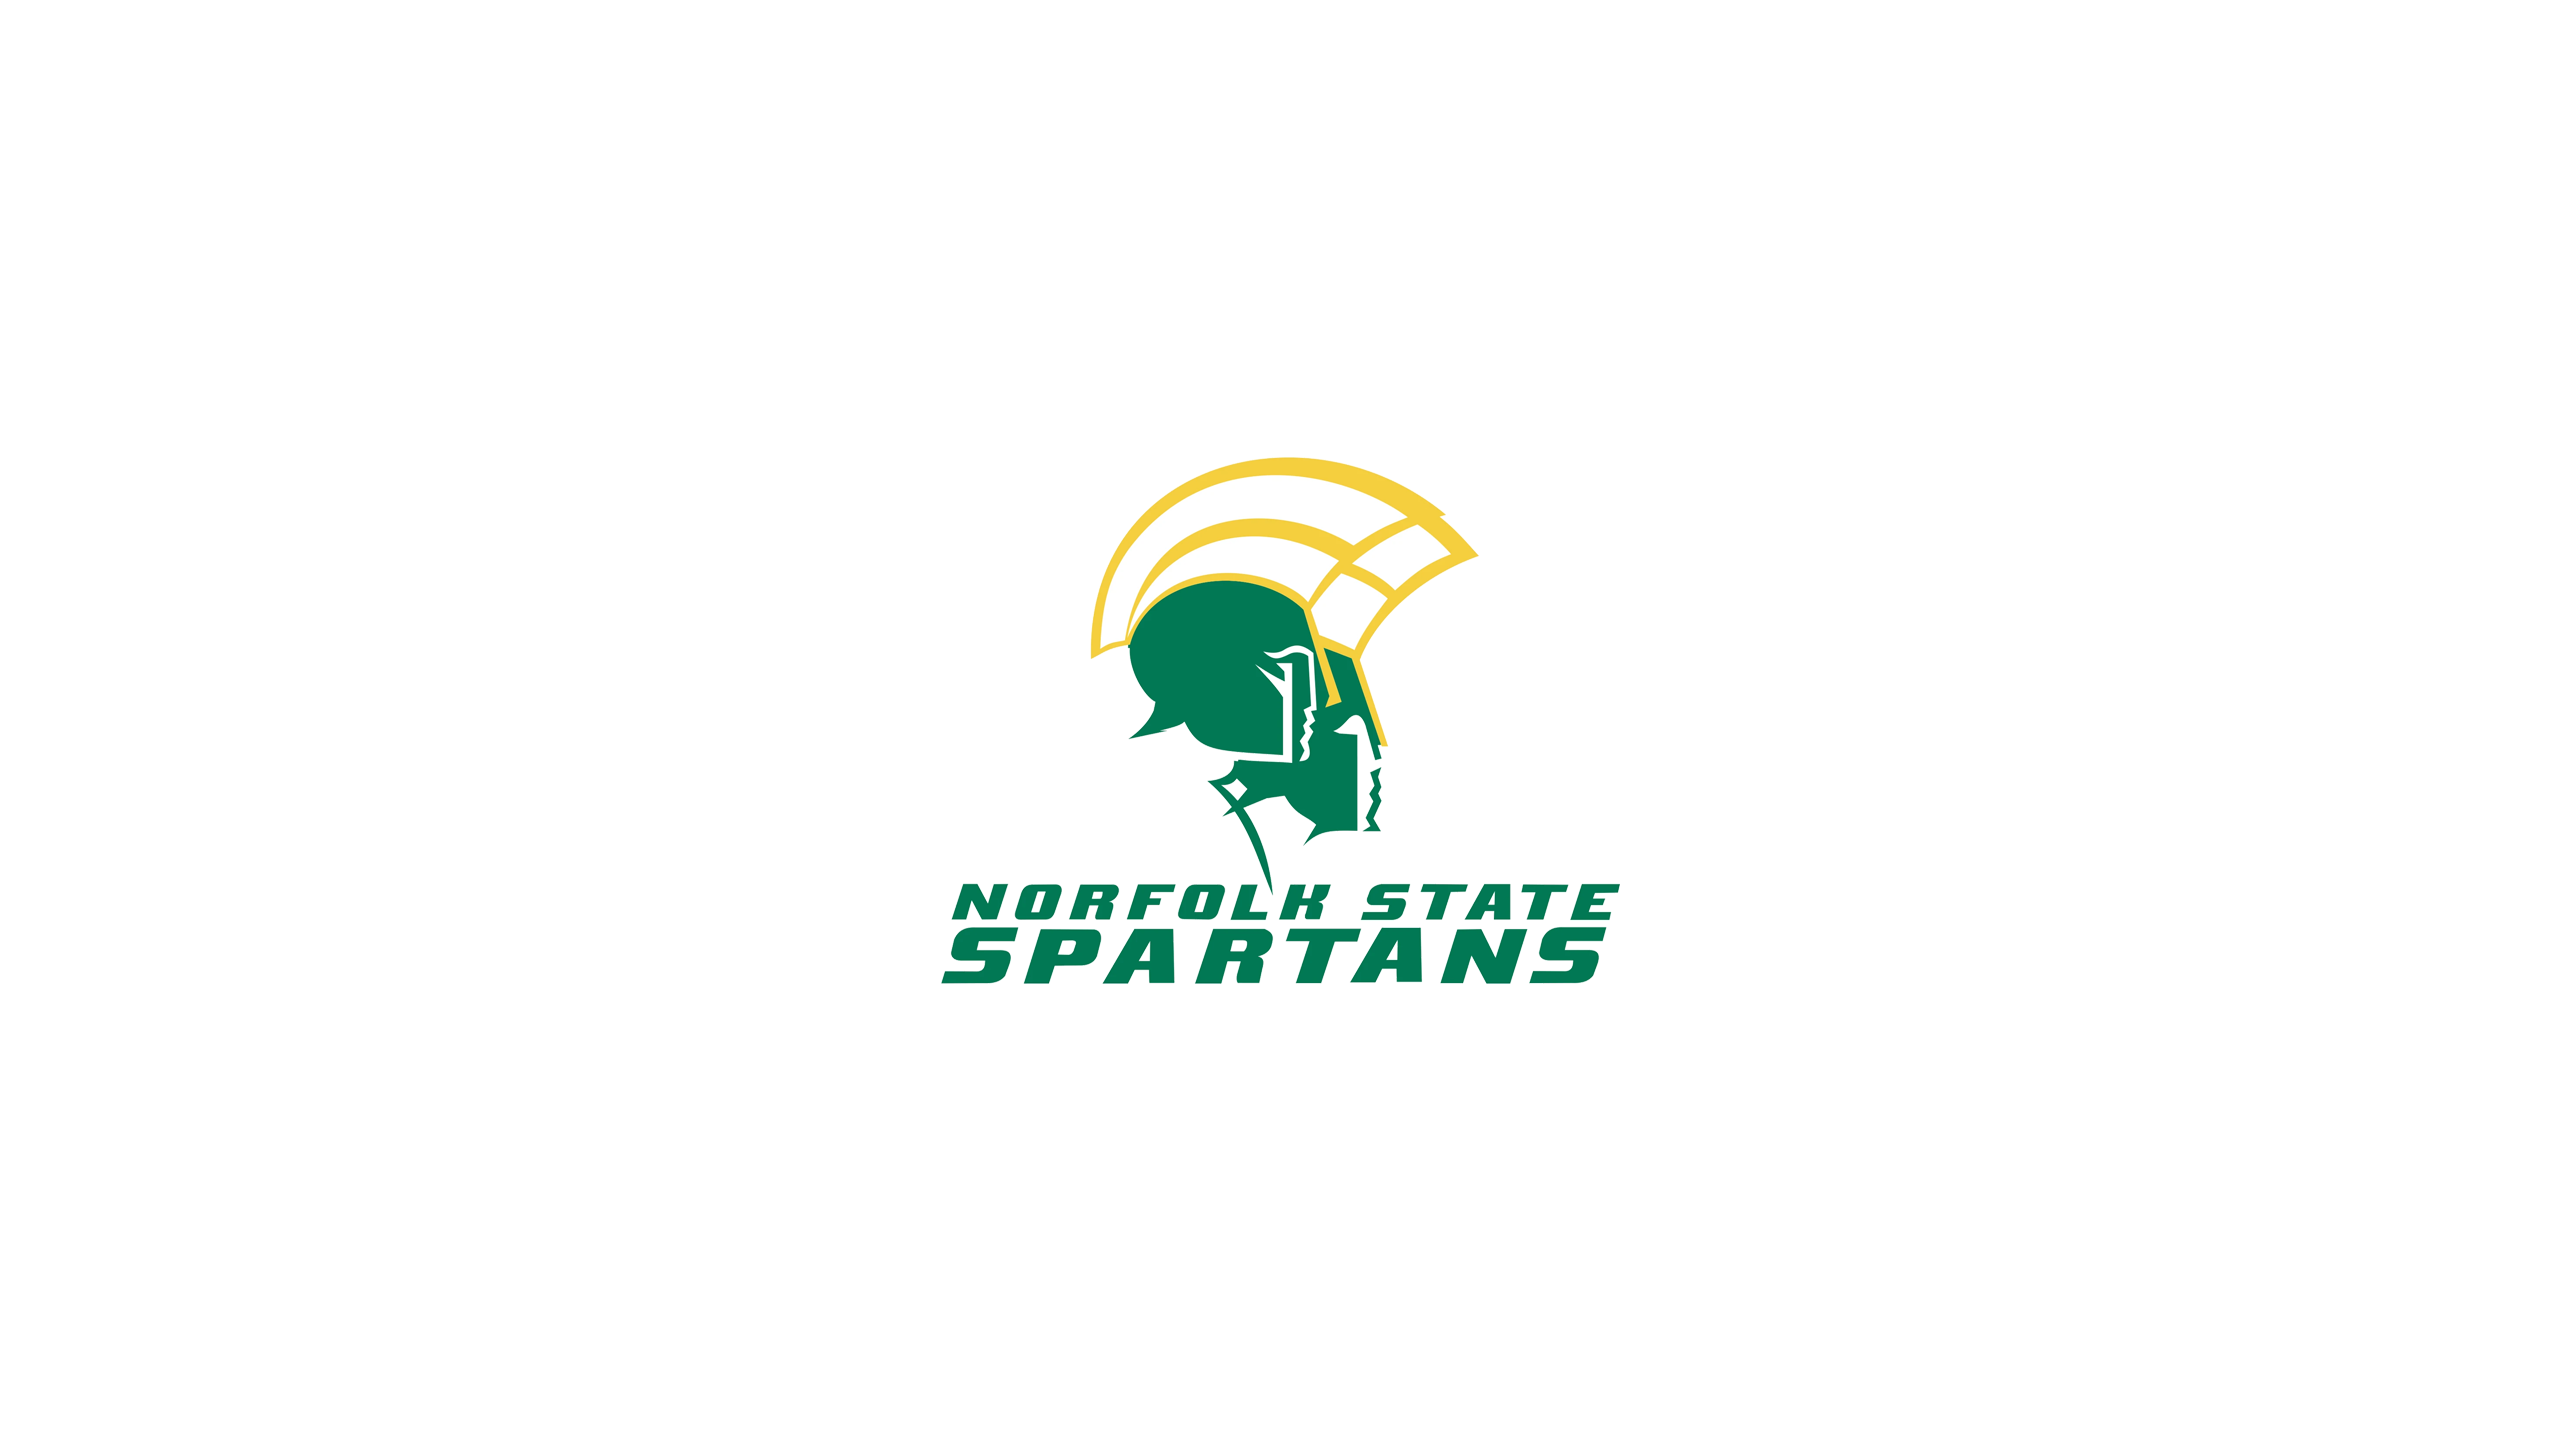 Norfolk State Spartans Basketball - NCAAB - Square Bettor